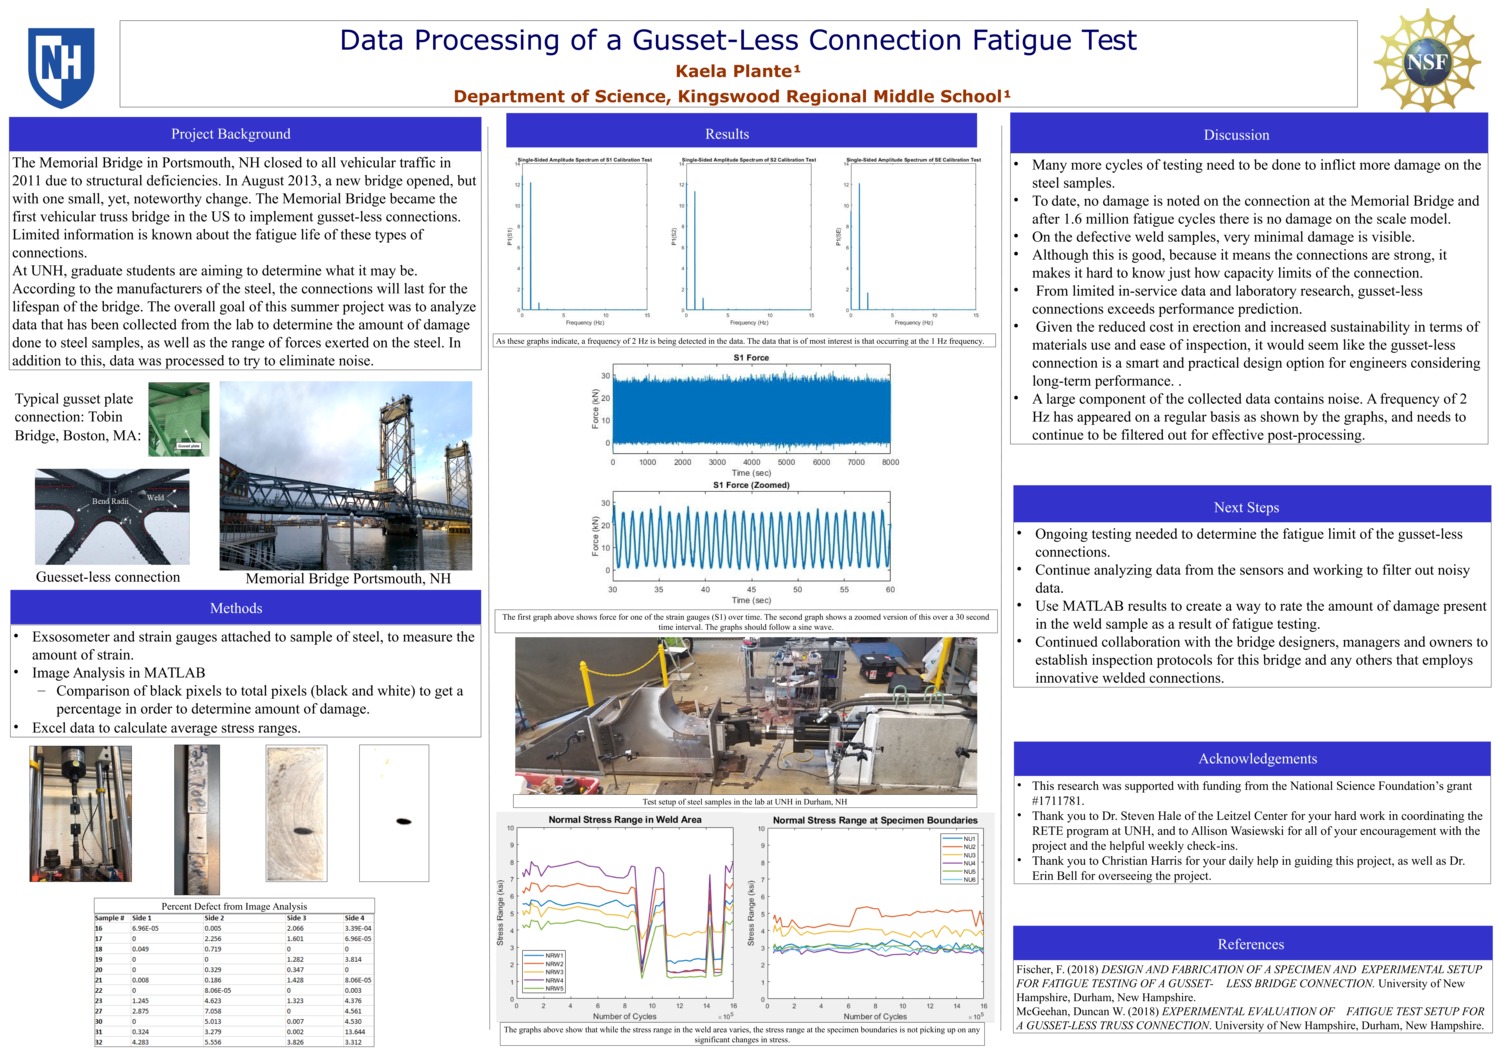 Data Processing Of A Gusset-Less Connection Fatigue Test  by kplante13